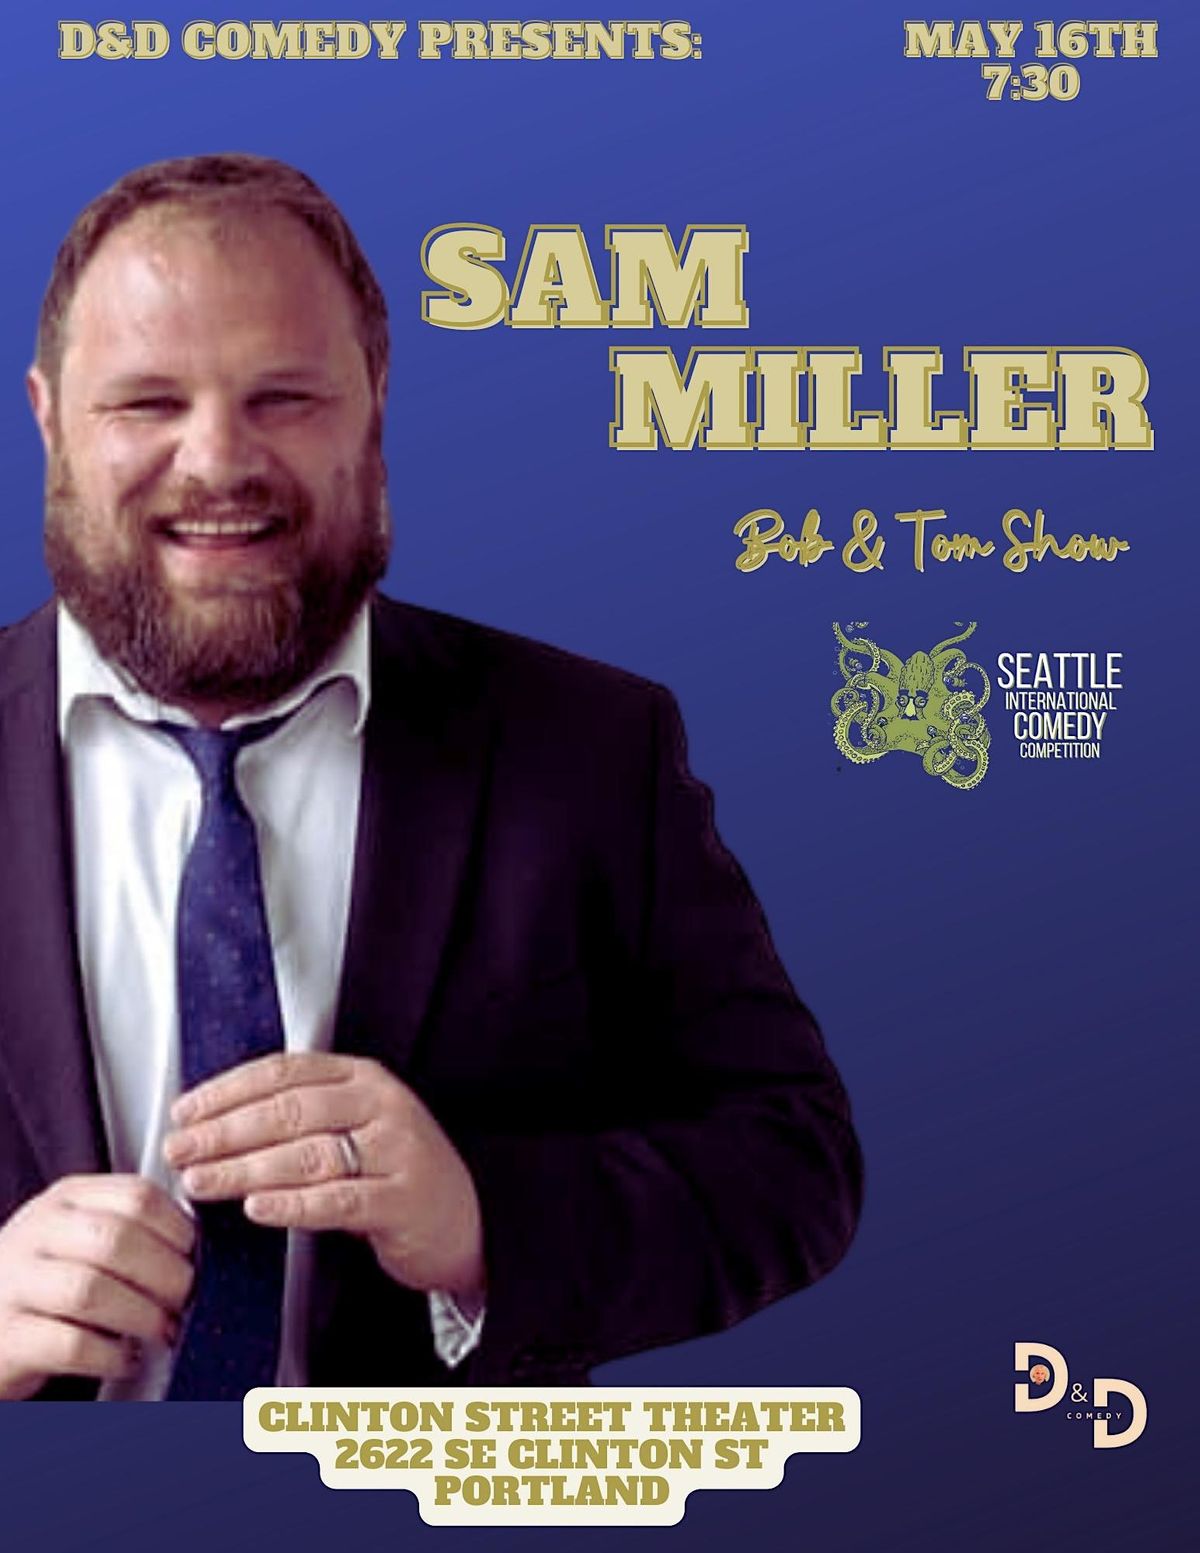 D&D Comedy Presents:  Sam Miller at The Clinton Street Theater